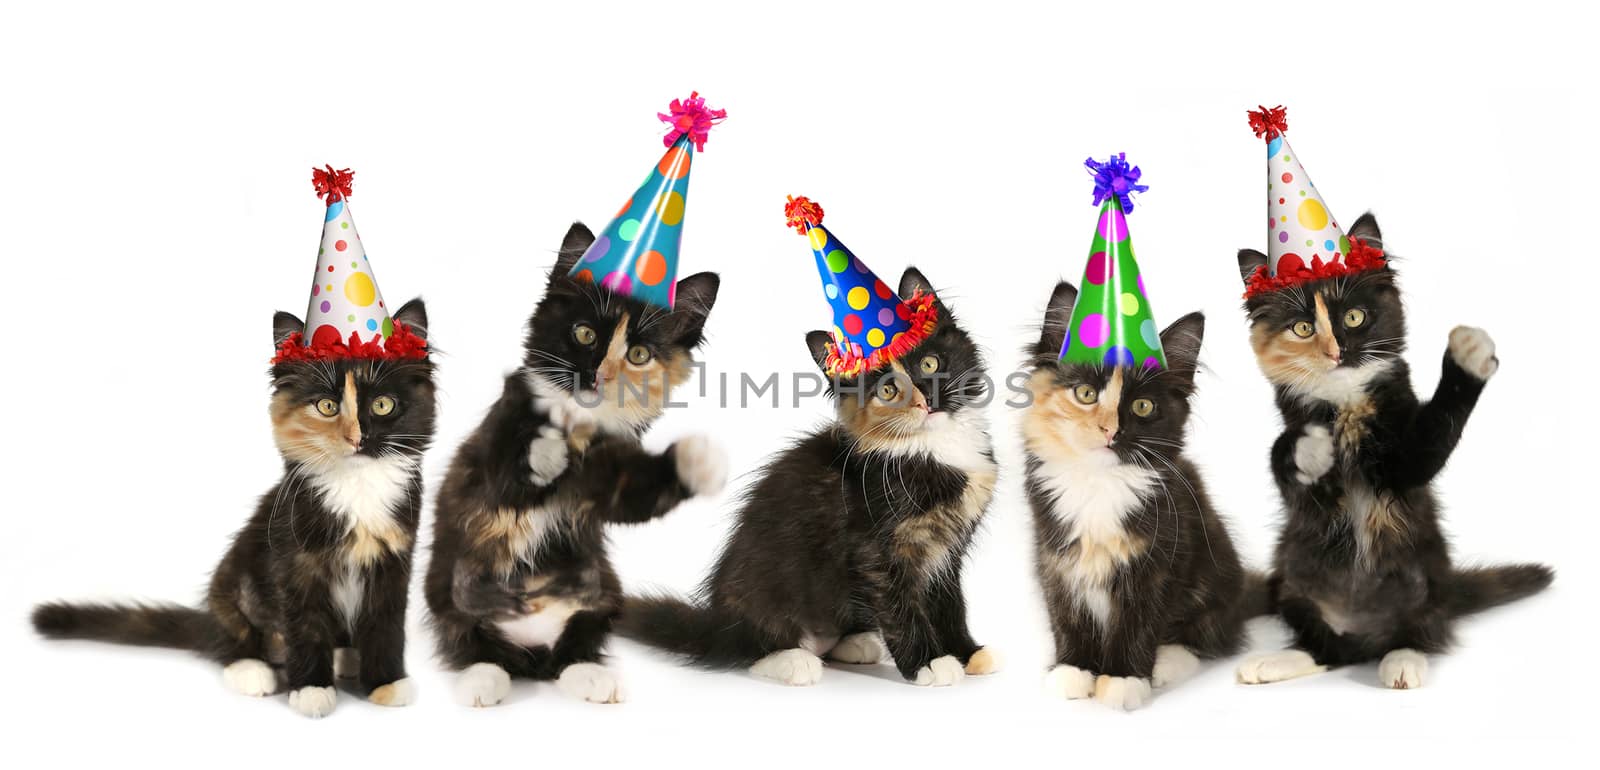 5 Kittens on a White Background With Birthday Hats by tobkatrina